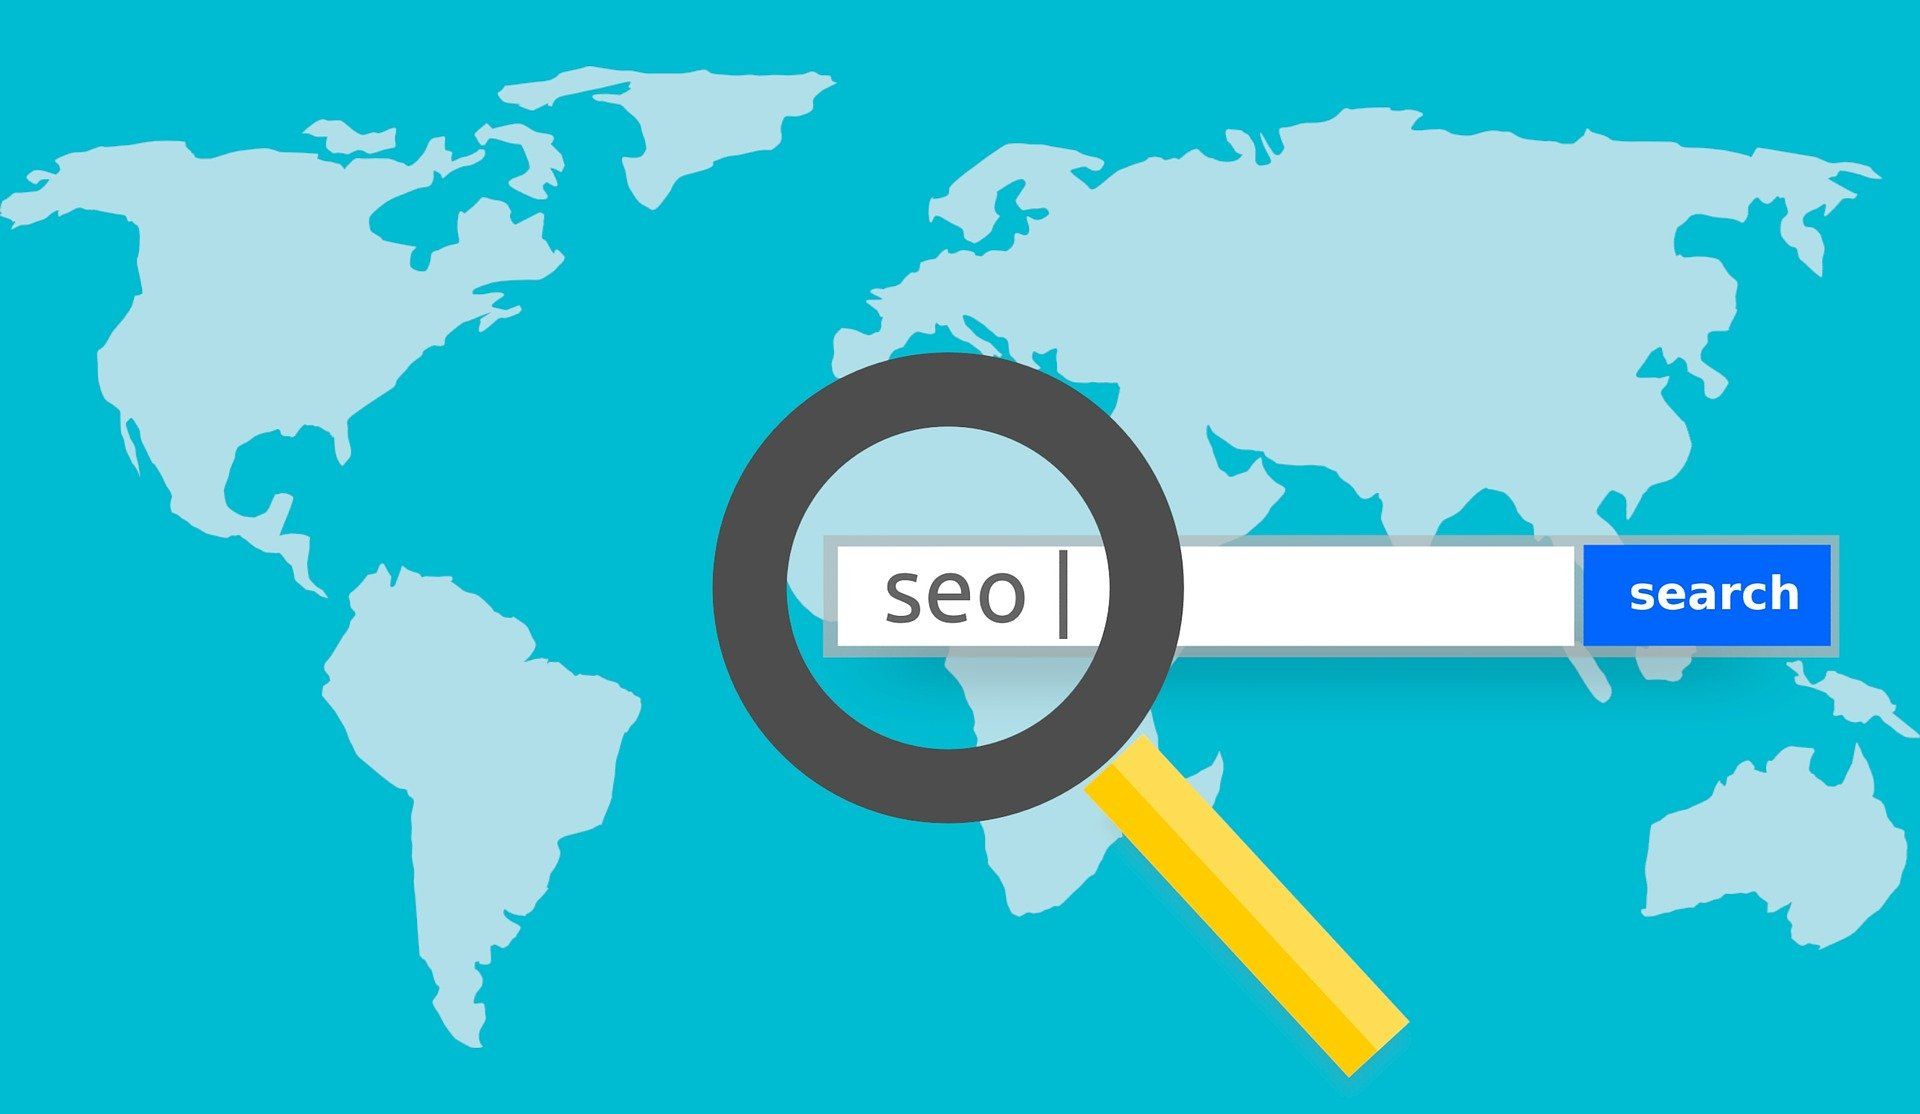 How to Conduct a Website SEO Audit